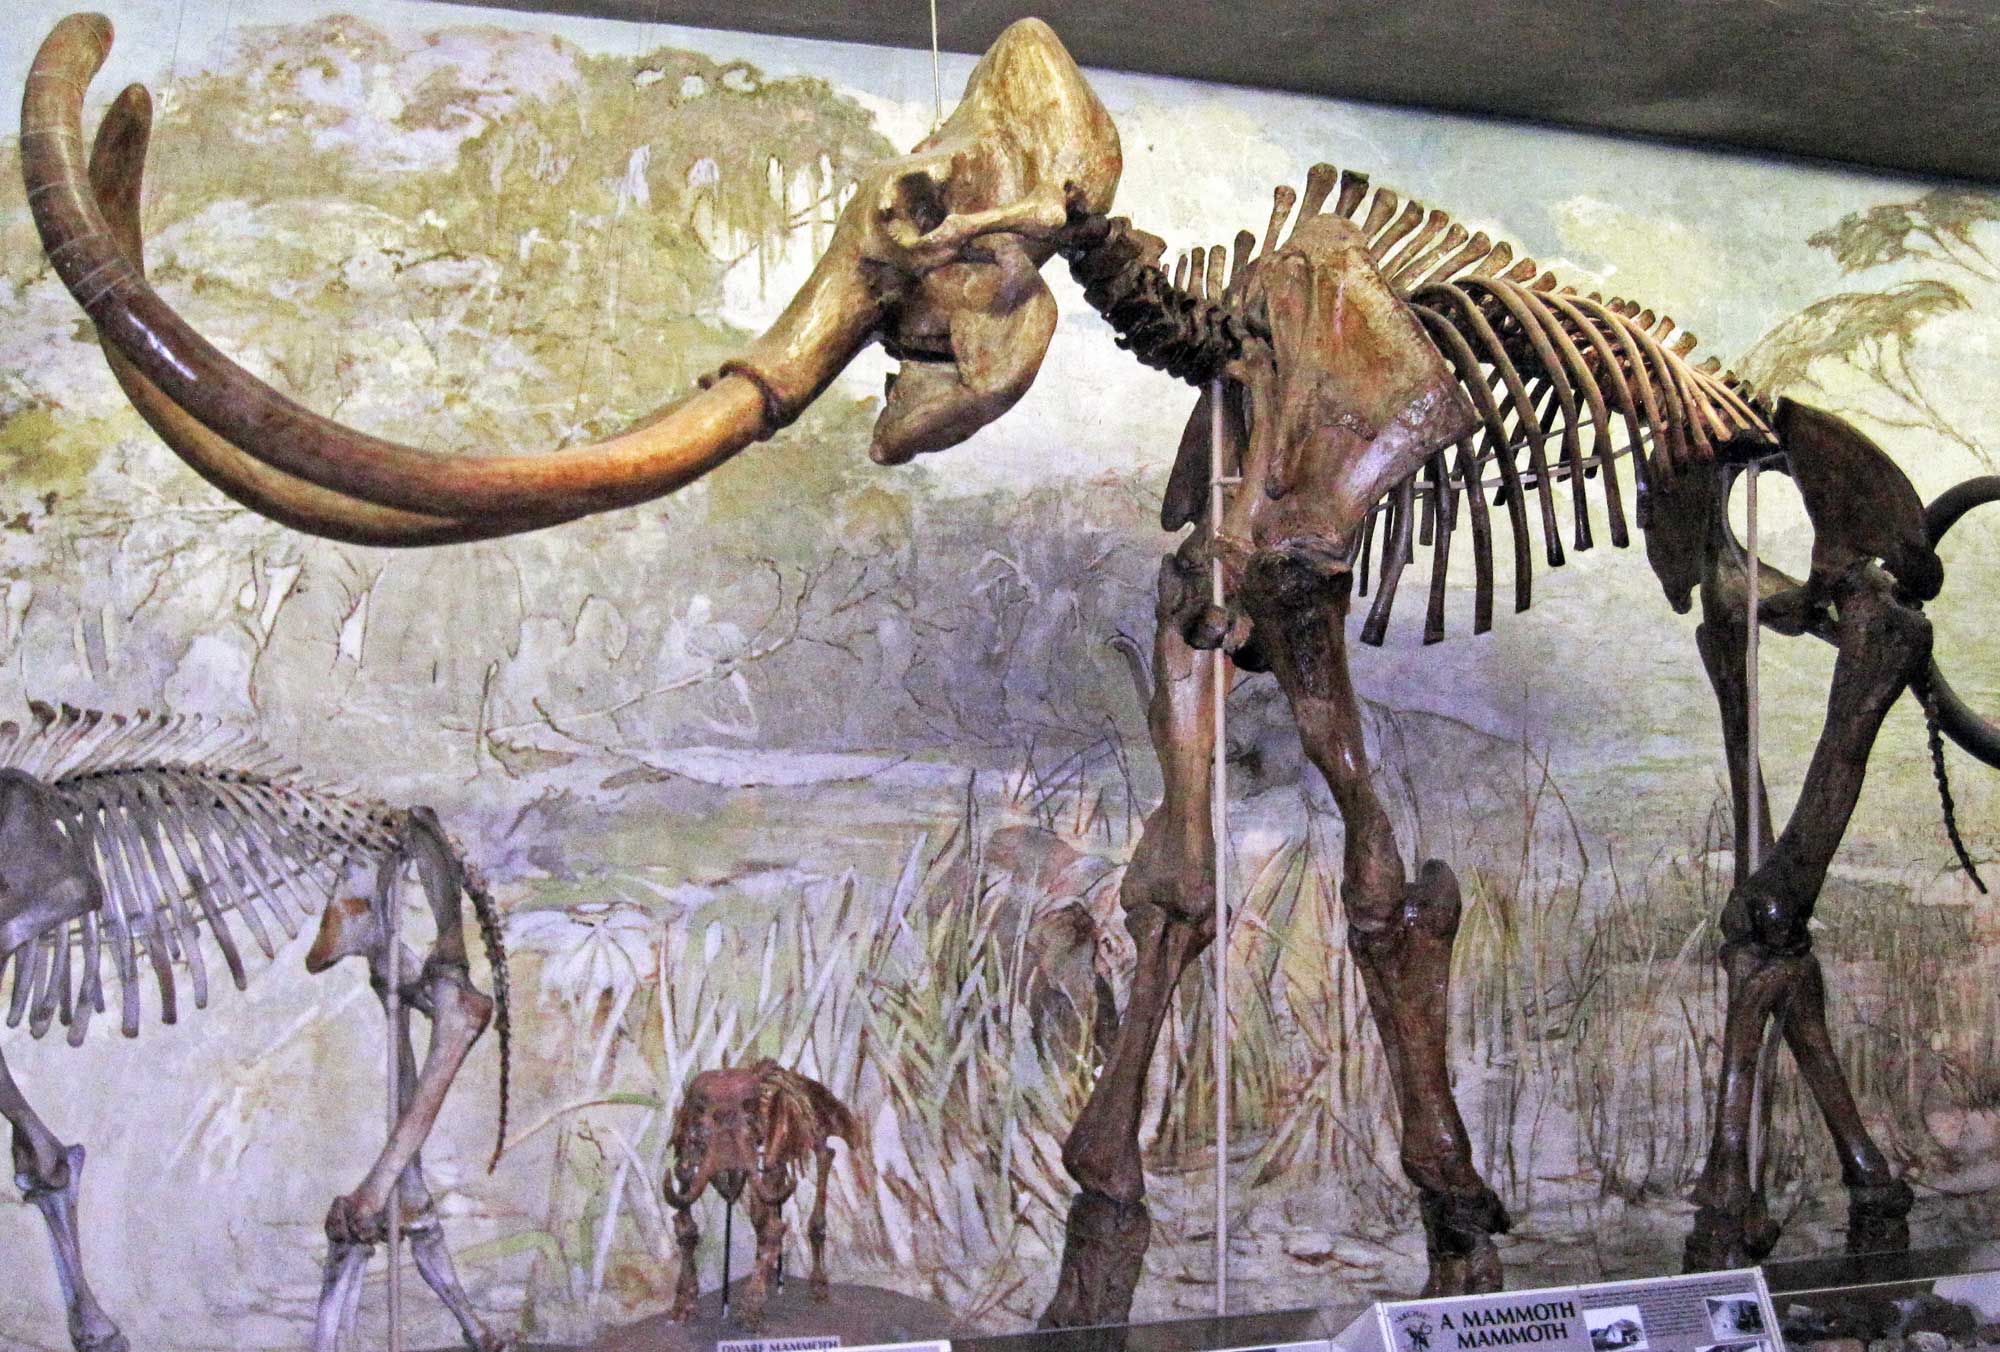 Photograph of the skeleton of Archie, a Columbian mammoth, on display in a museum. The photo shows the mounted skeleton of a large elephant-like animal in a walking pose.